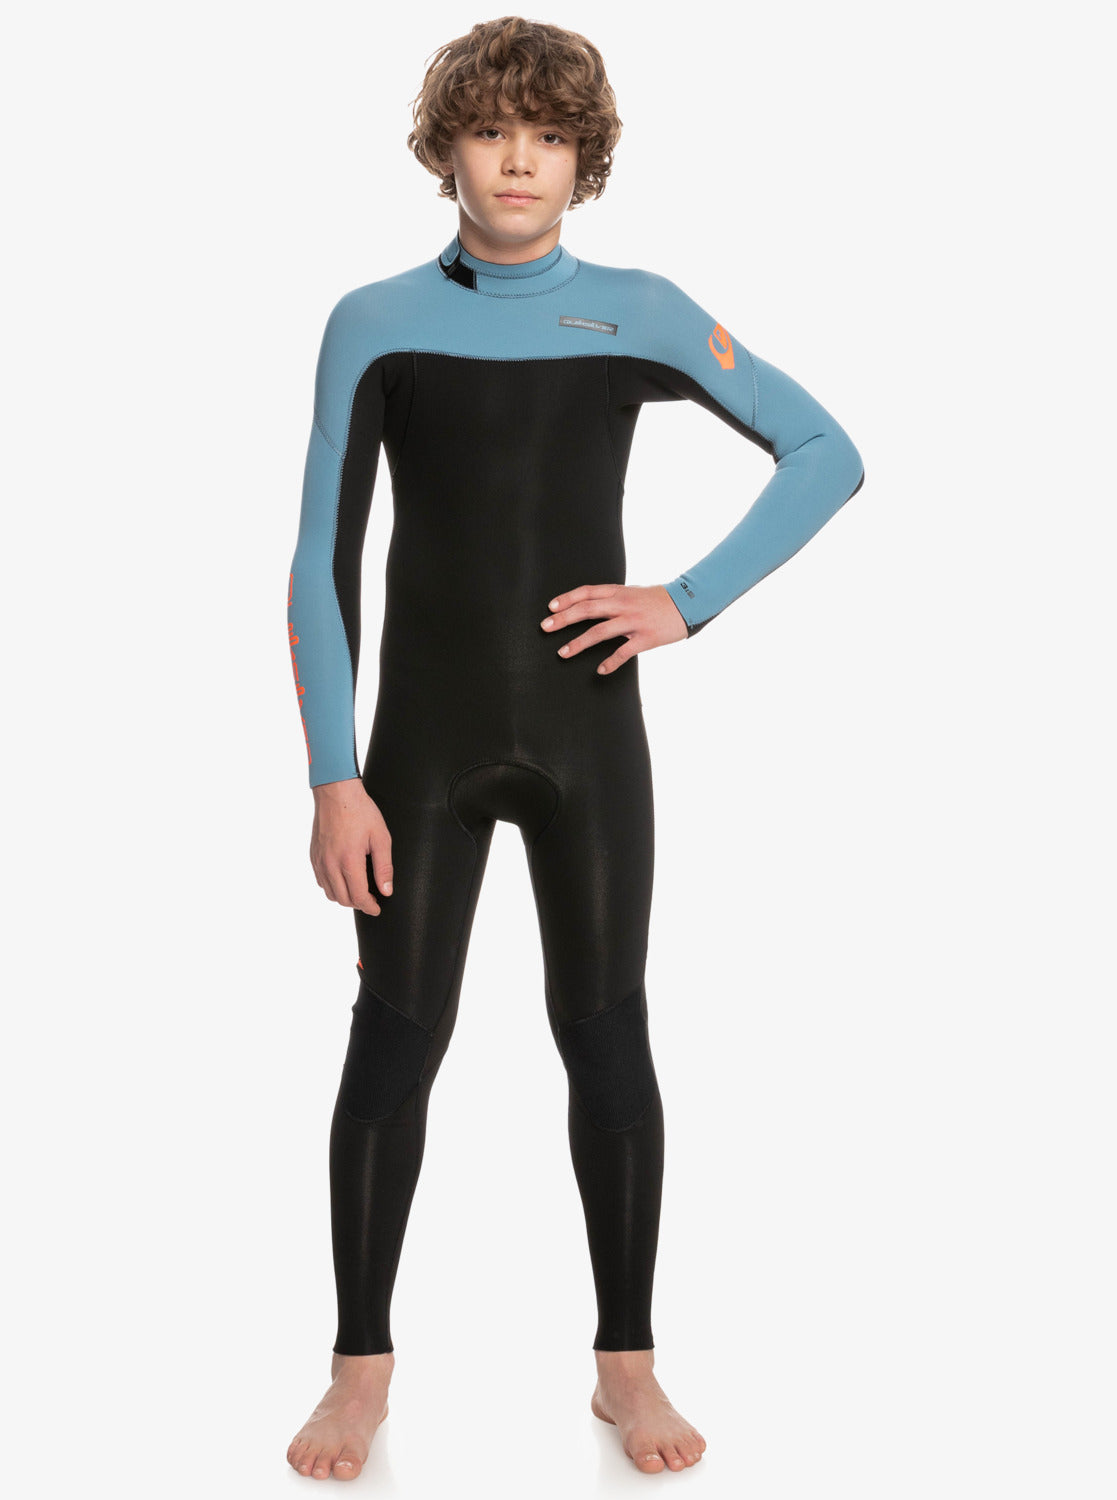 Boys 8-16 3/2mm Everyday Sessions Back Zip Wetsuit - Black/Provincial Blue